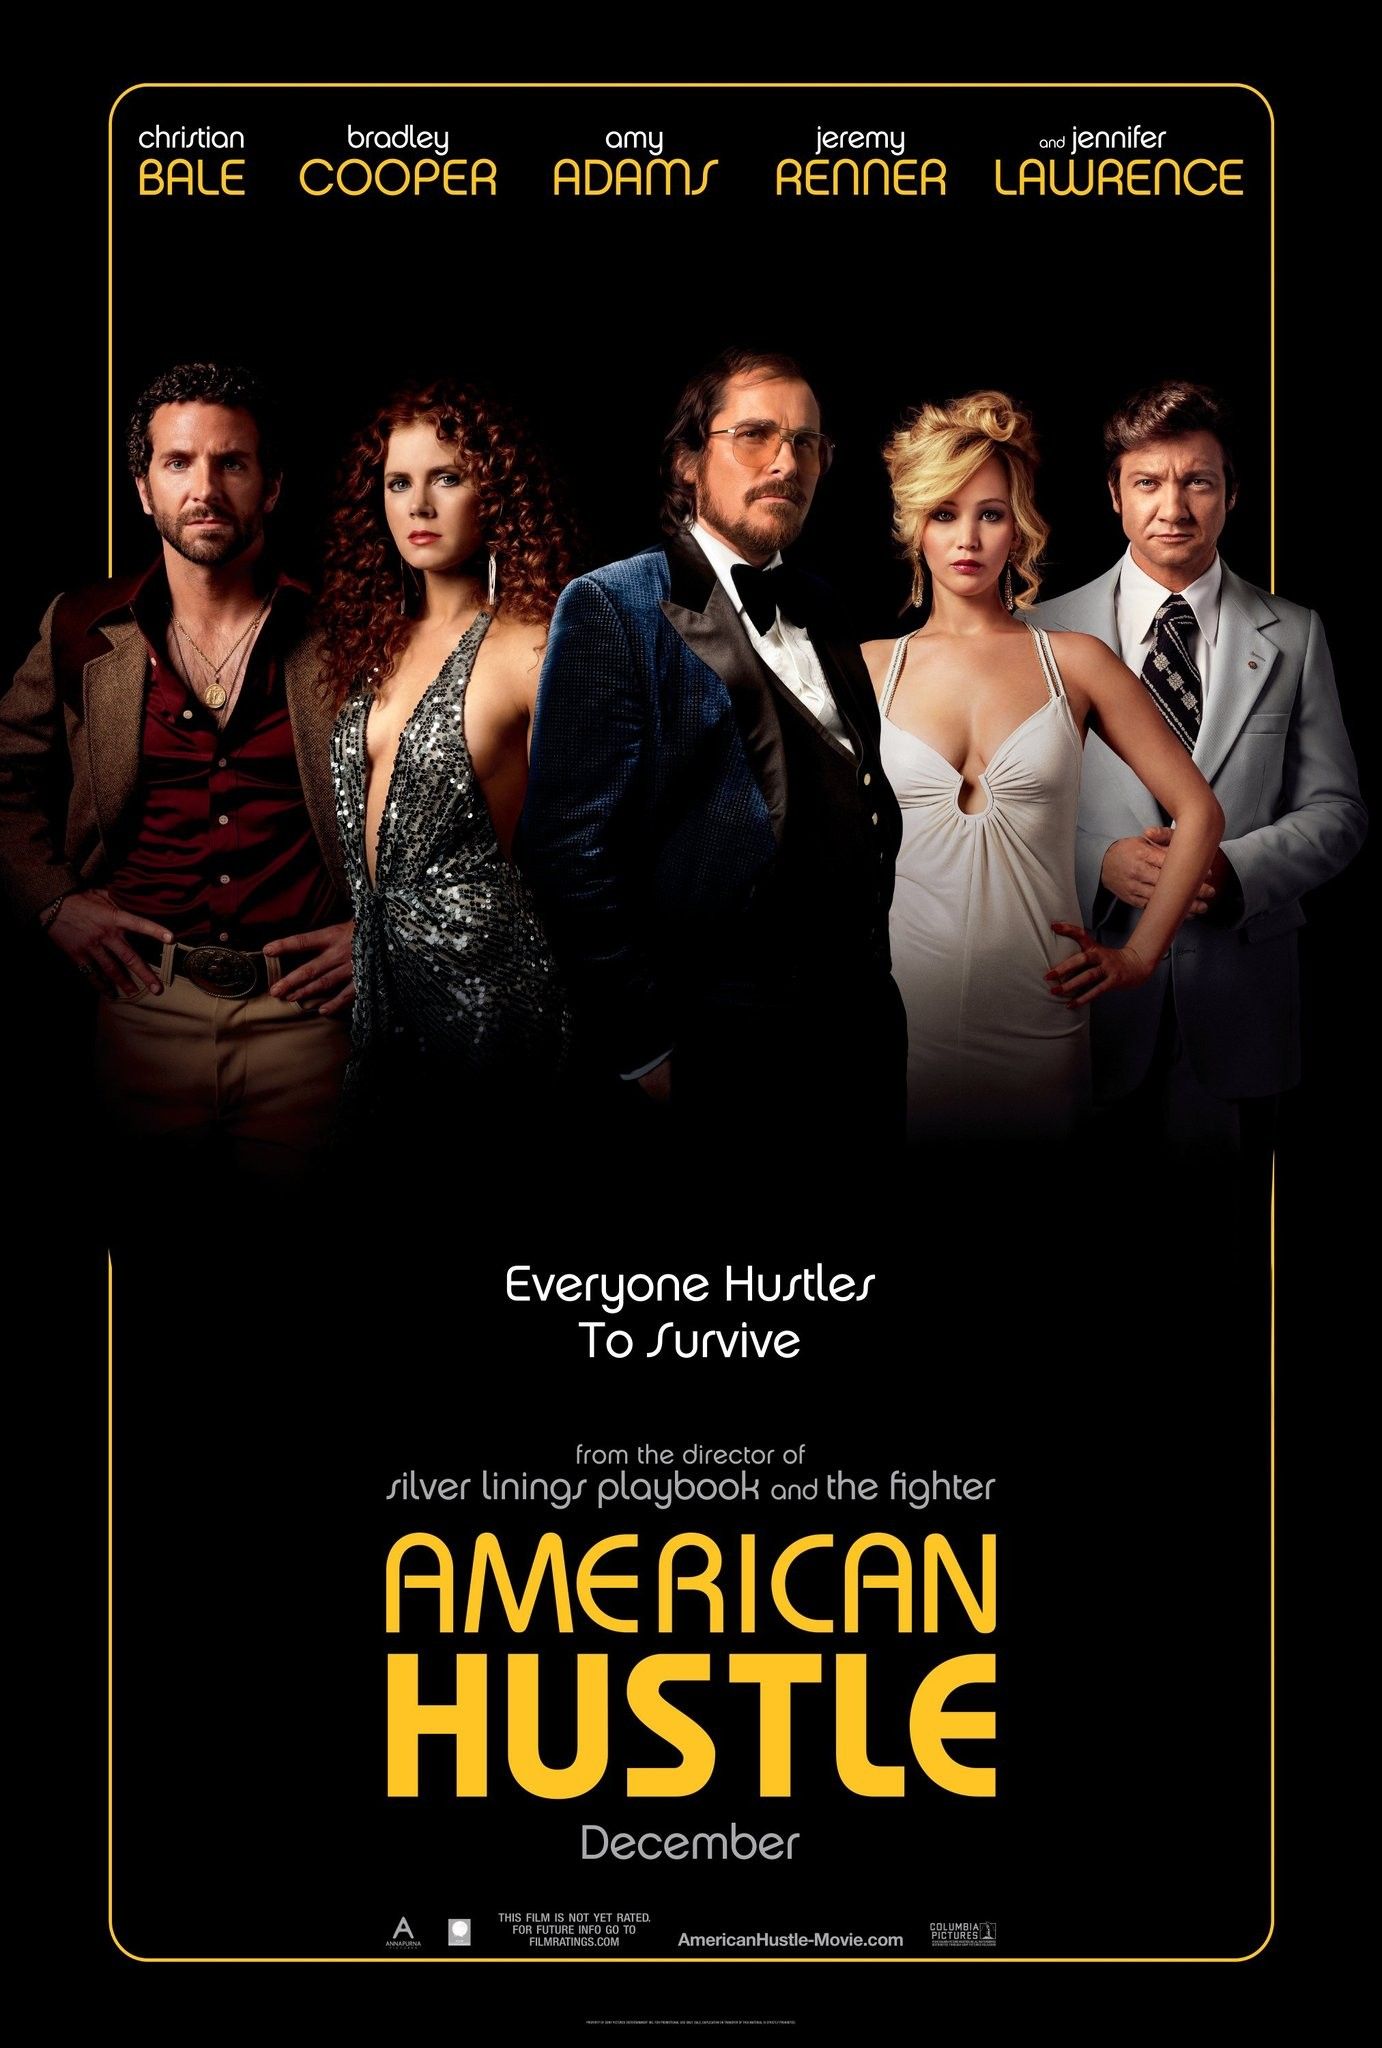 Critics' Choice Award Nominations Led by 12 YEARS A SLAVE and AMERICAN HUSTLE | Collider1382 x 2048